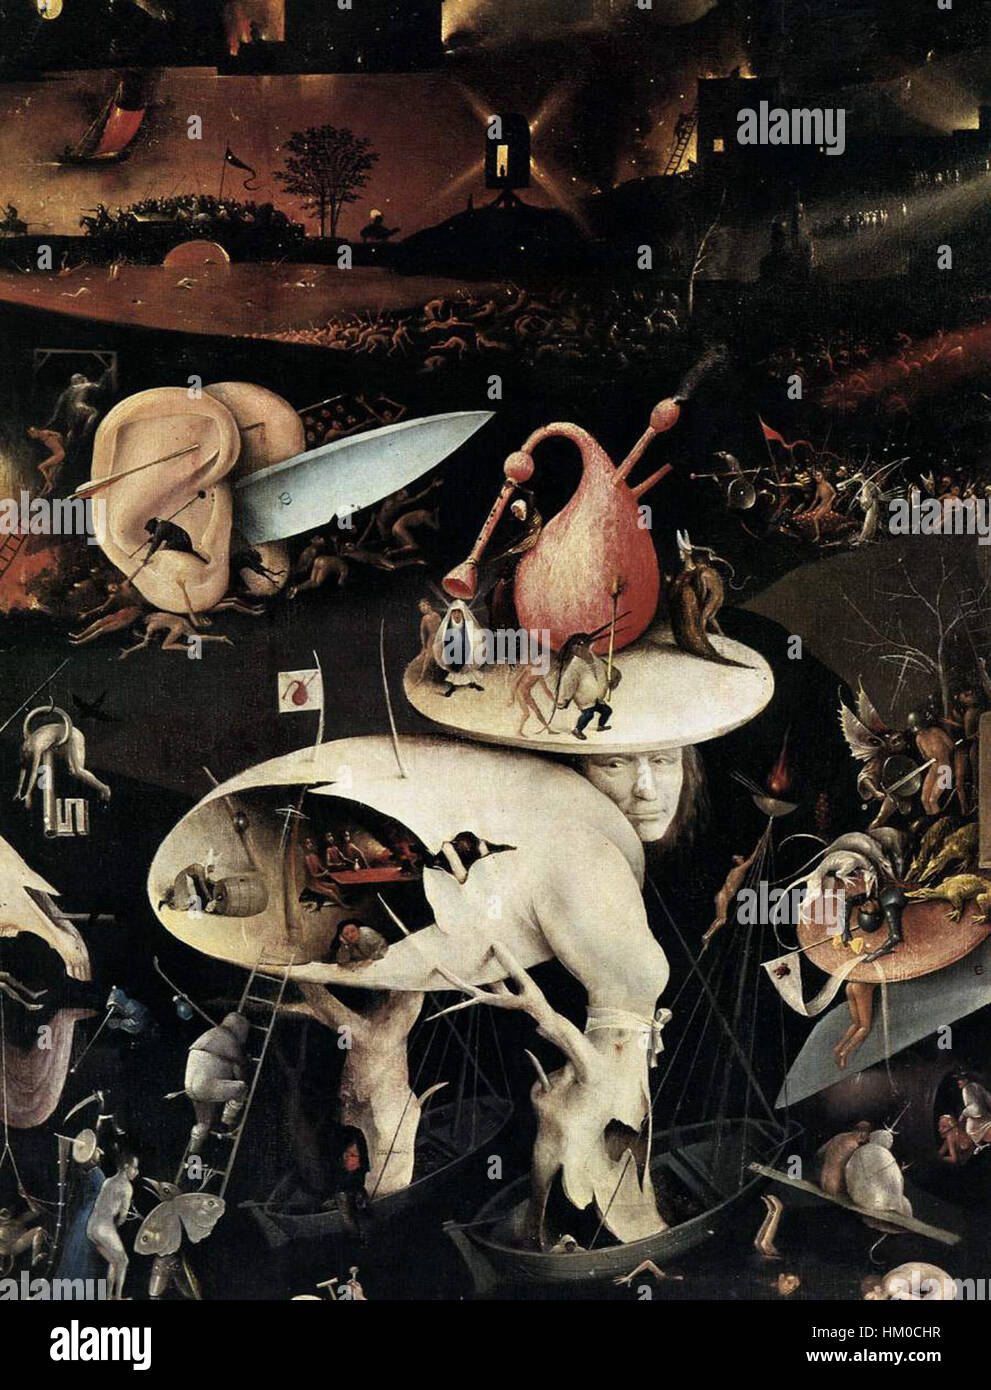 Hieronymus Bosch - Triptych of Garden of Earthly Delights (detail) - WGA2525 Stock Photo